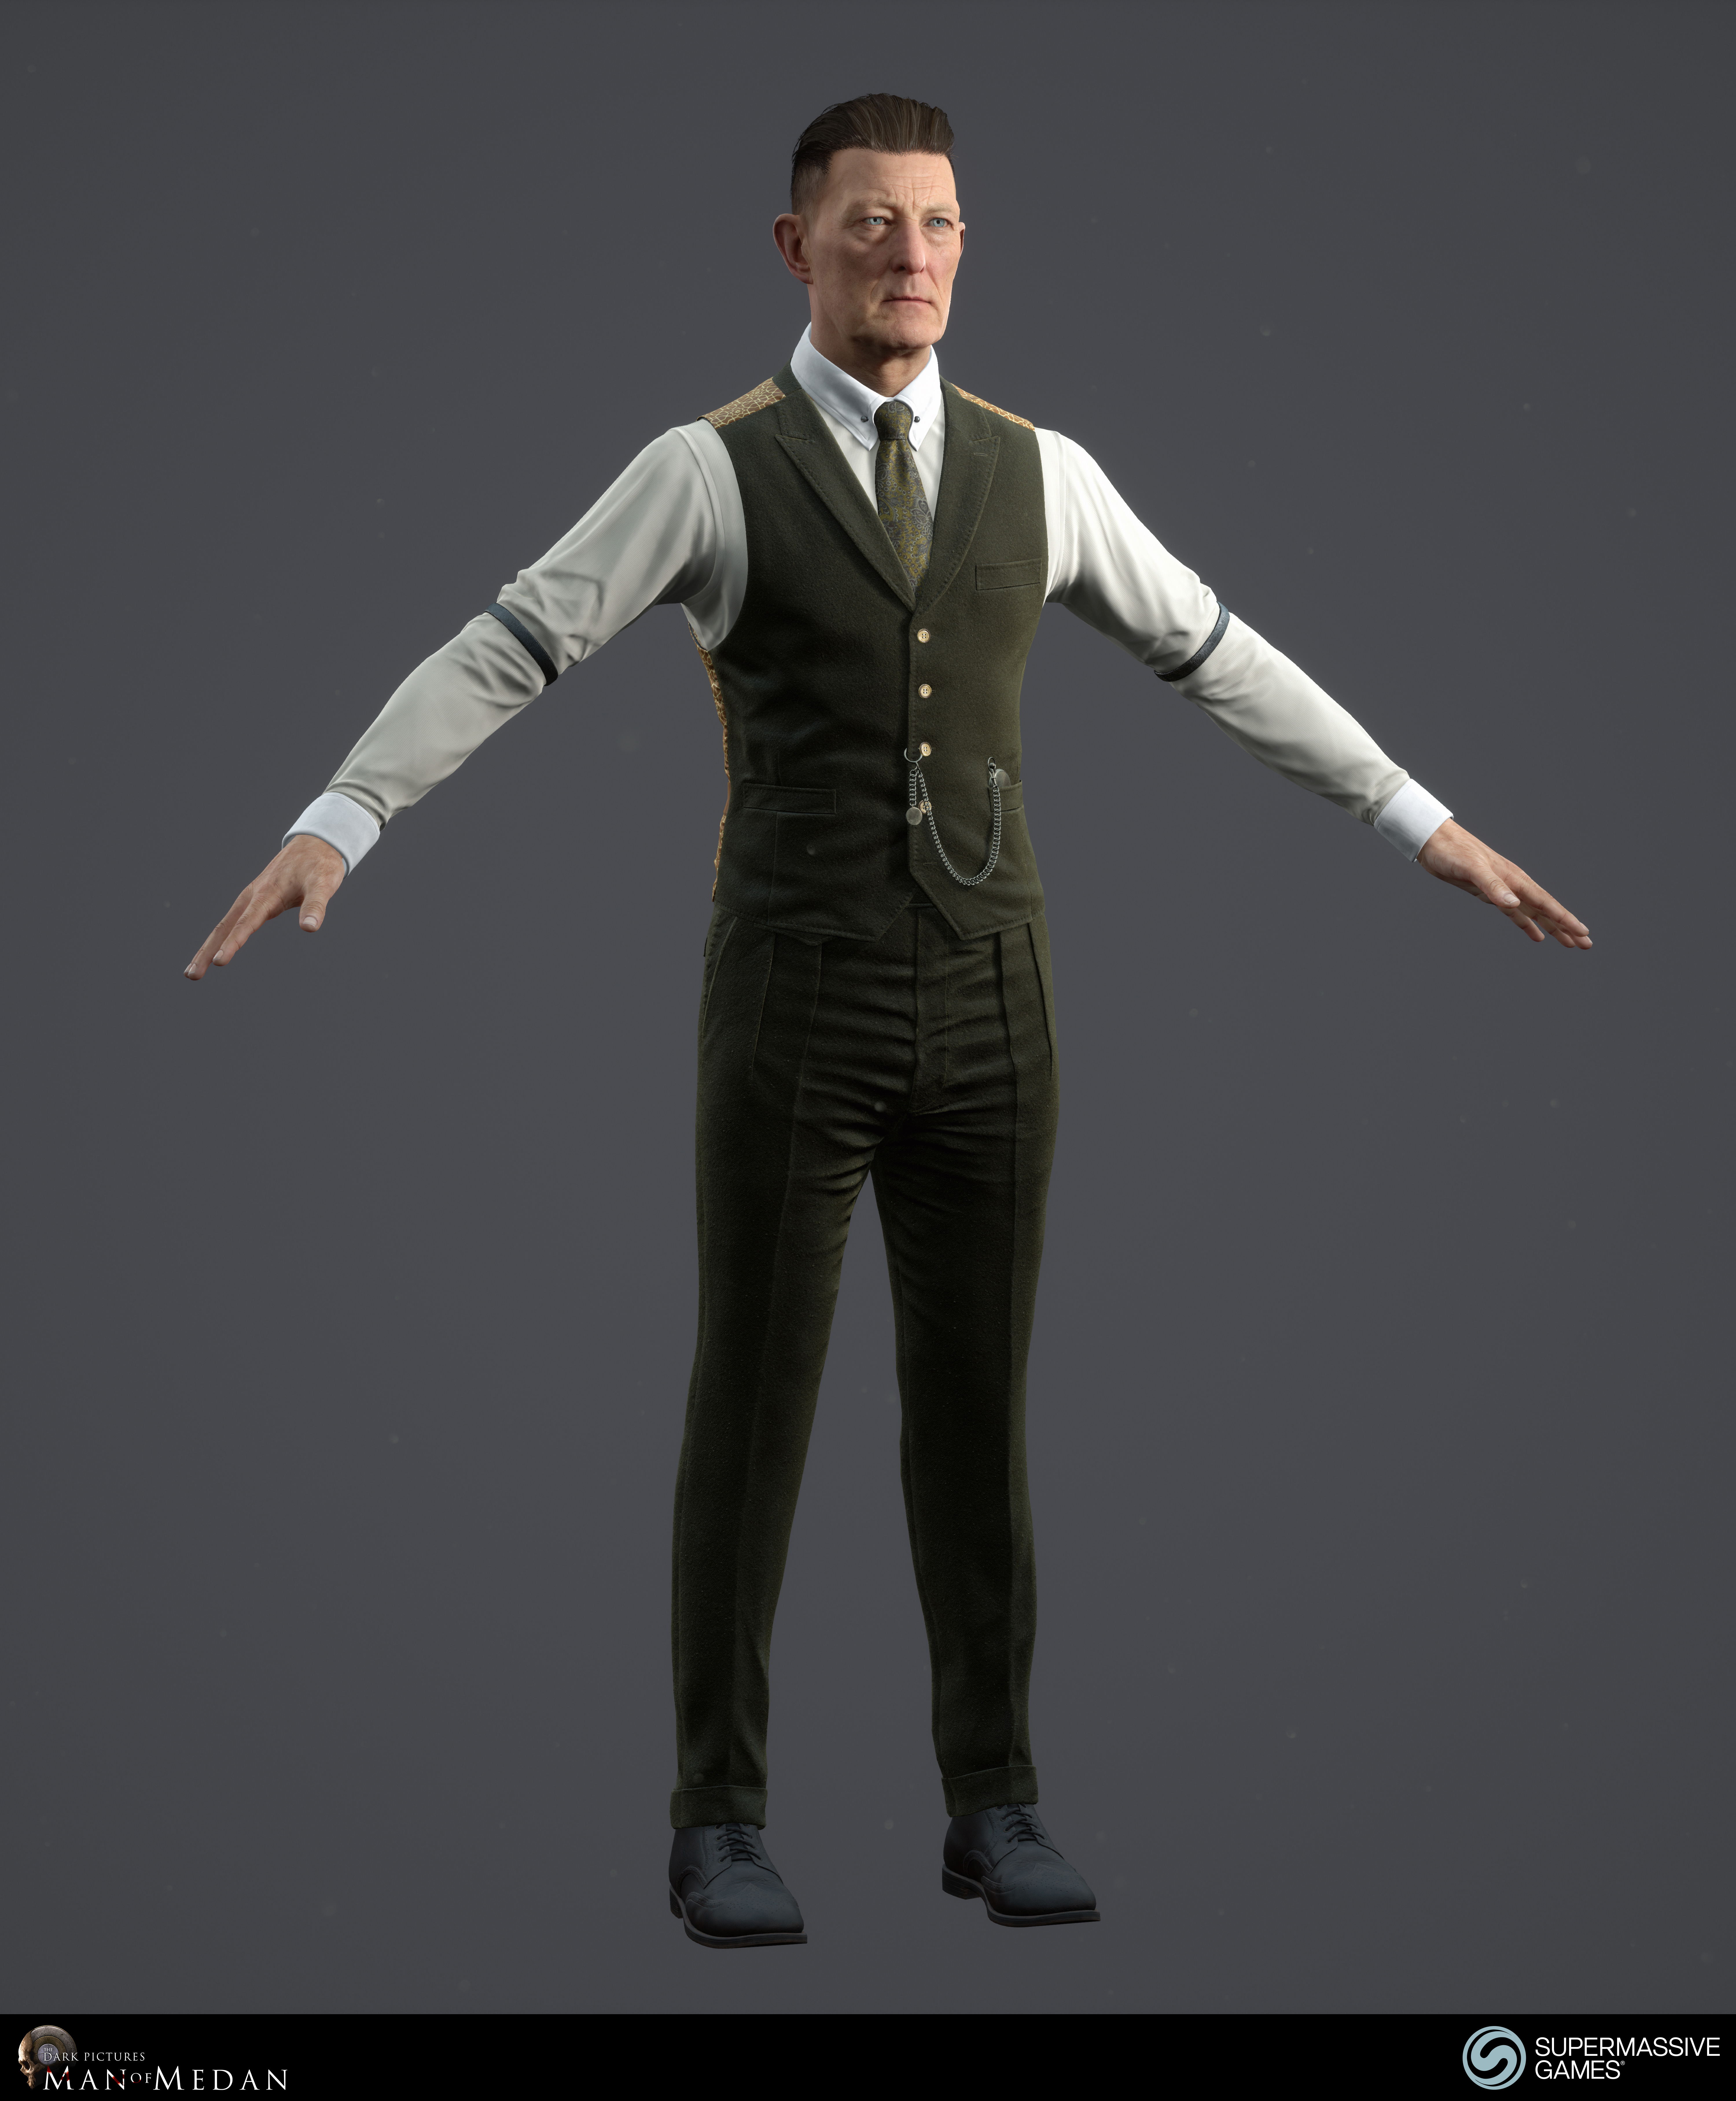 The Curator character from The Dark Pictures game in Unreal Engine. Cold hearted face with blue eyes, strong hold hair wax, elegant green costume, waistcoat, tie, pocket watch, sleeve garter. Andor Kollar